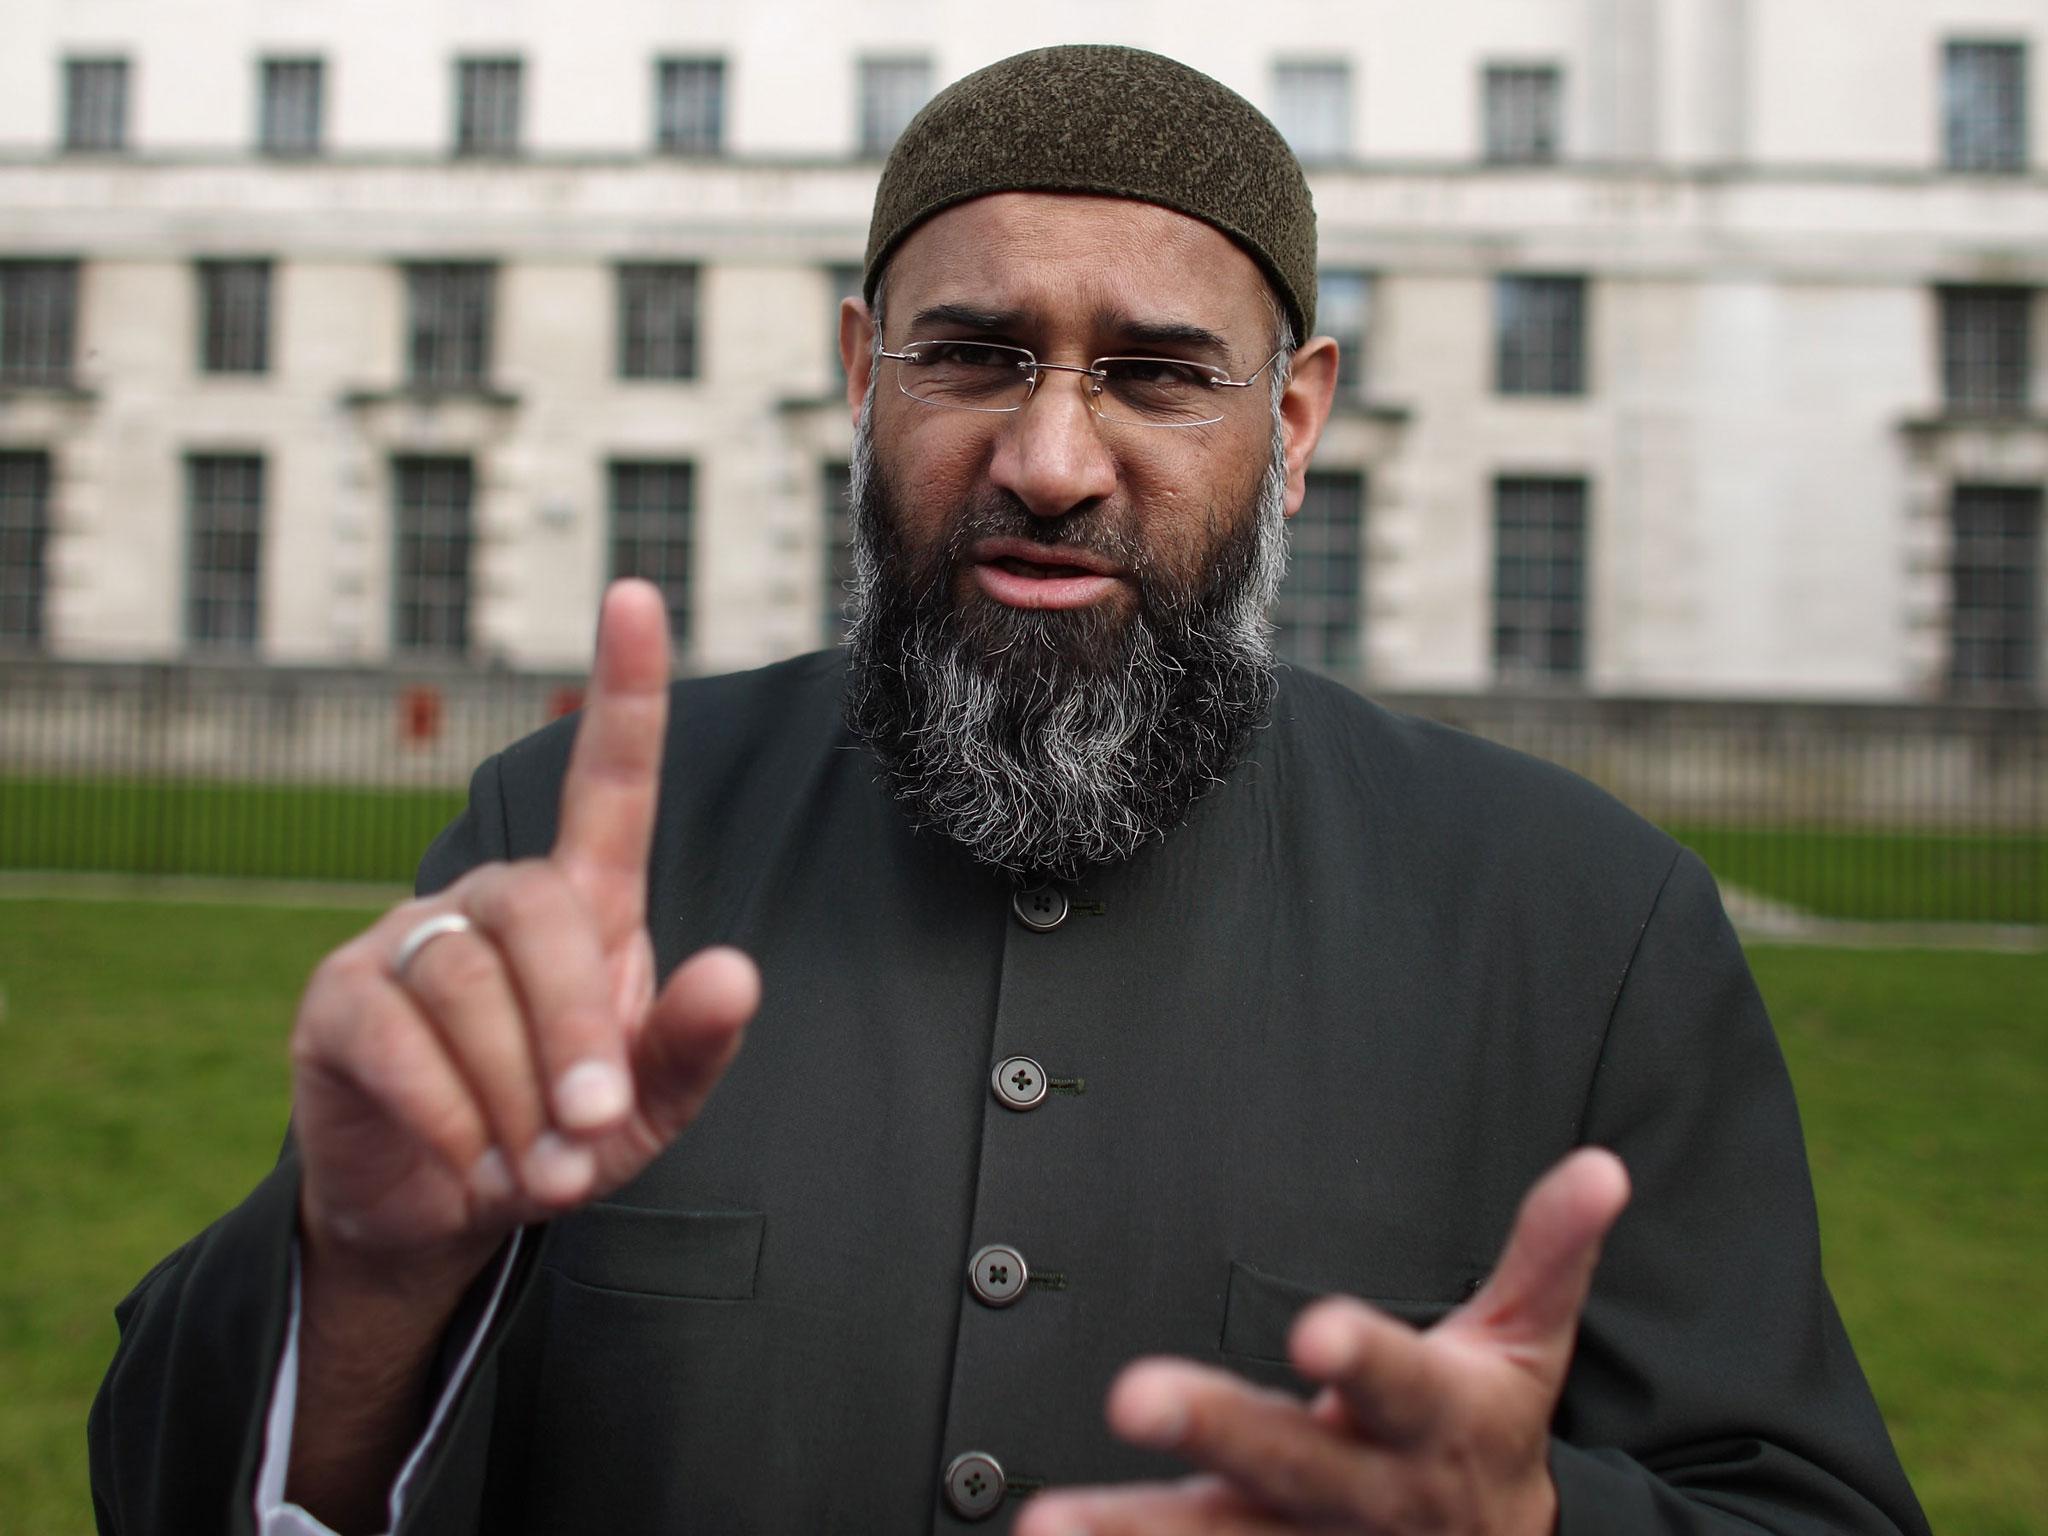 Hate preacher Anjem Choudary has been able to restart online activism after being released from prison